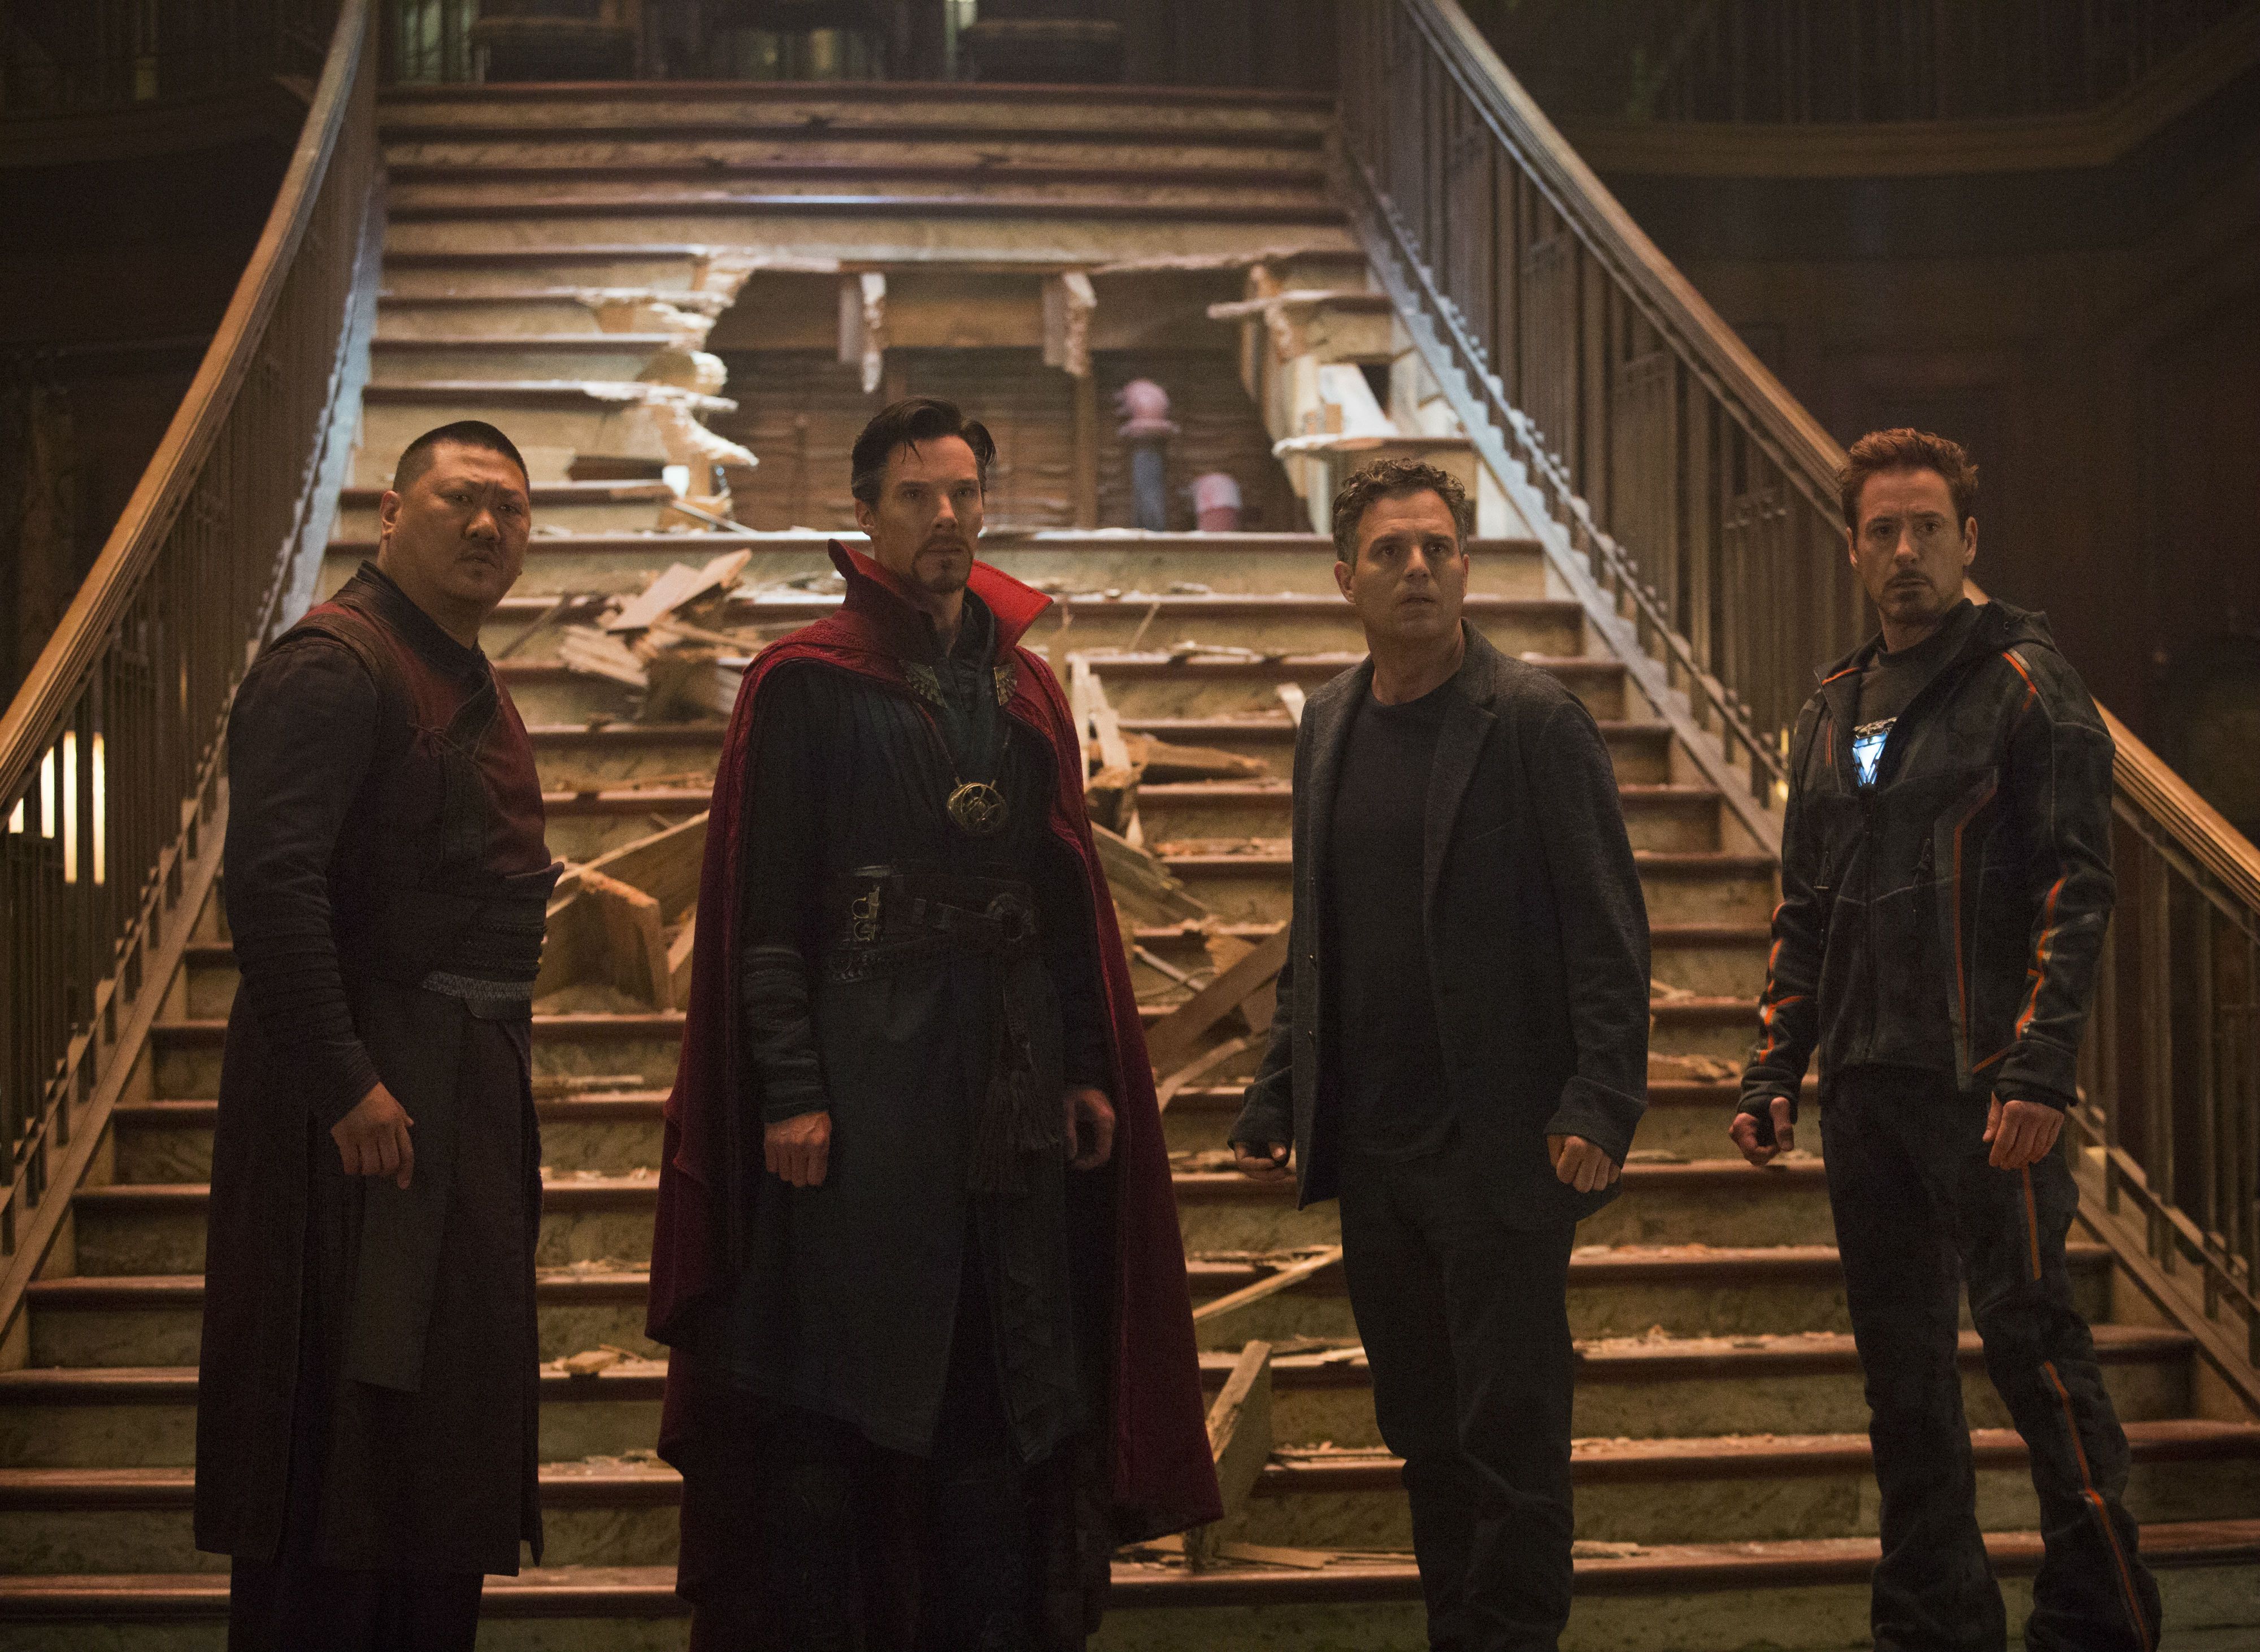 Watch Tony Stark, Bruce Banner & Dr. Strange In New Clip For Avengers: Infinity War.com Movies, Television, and Theatre News